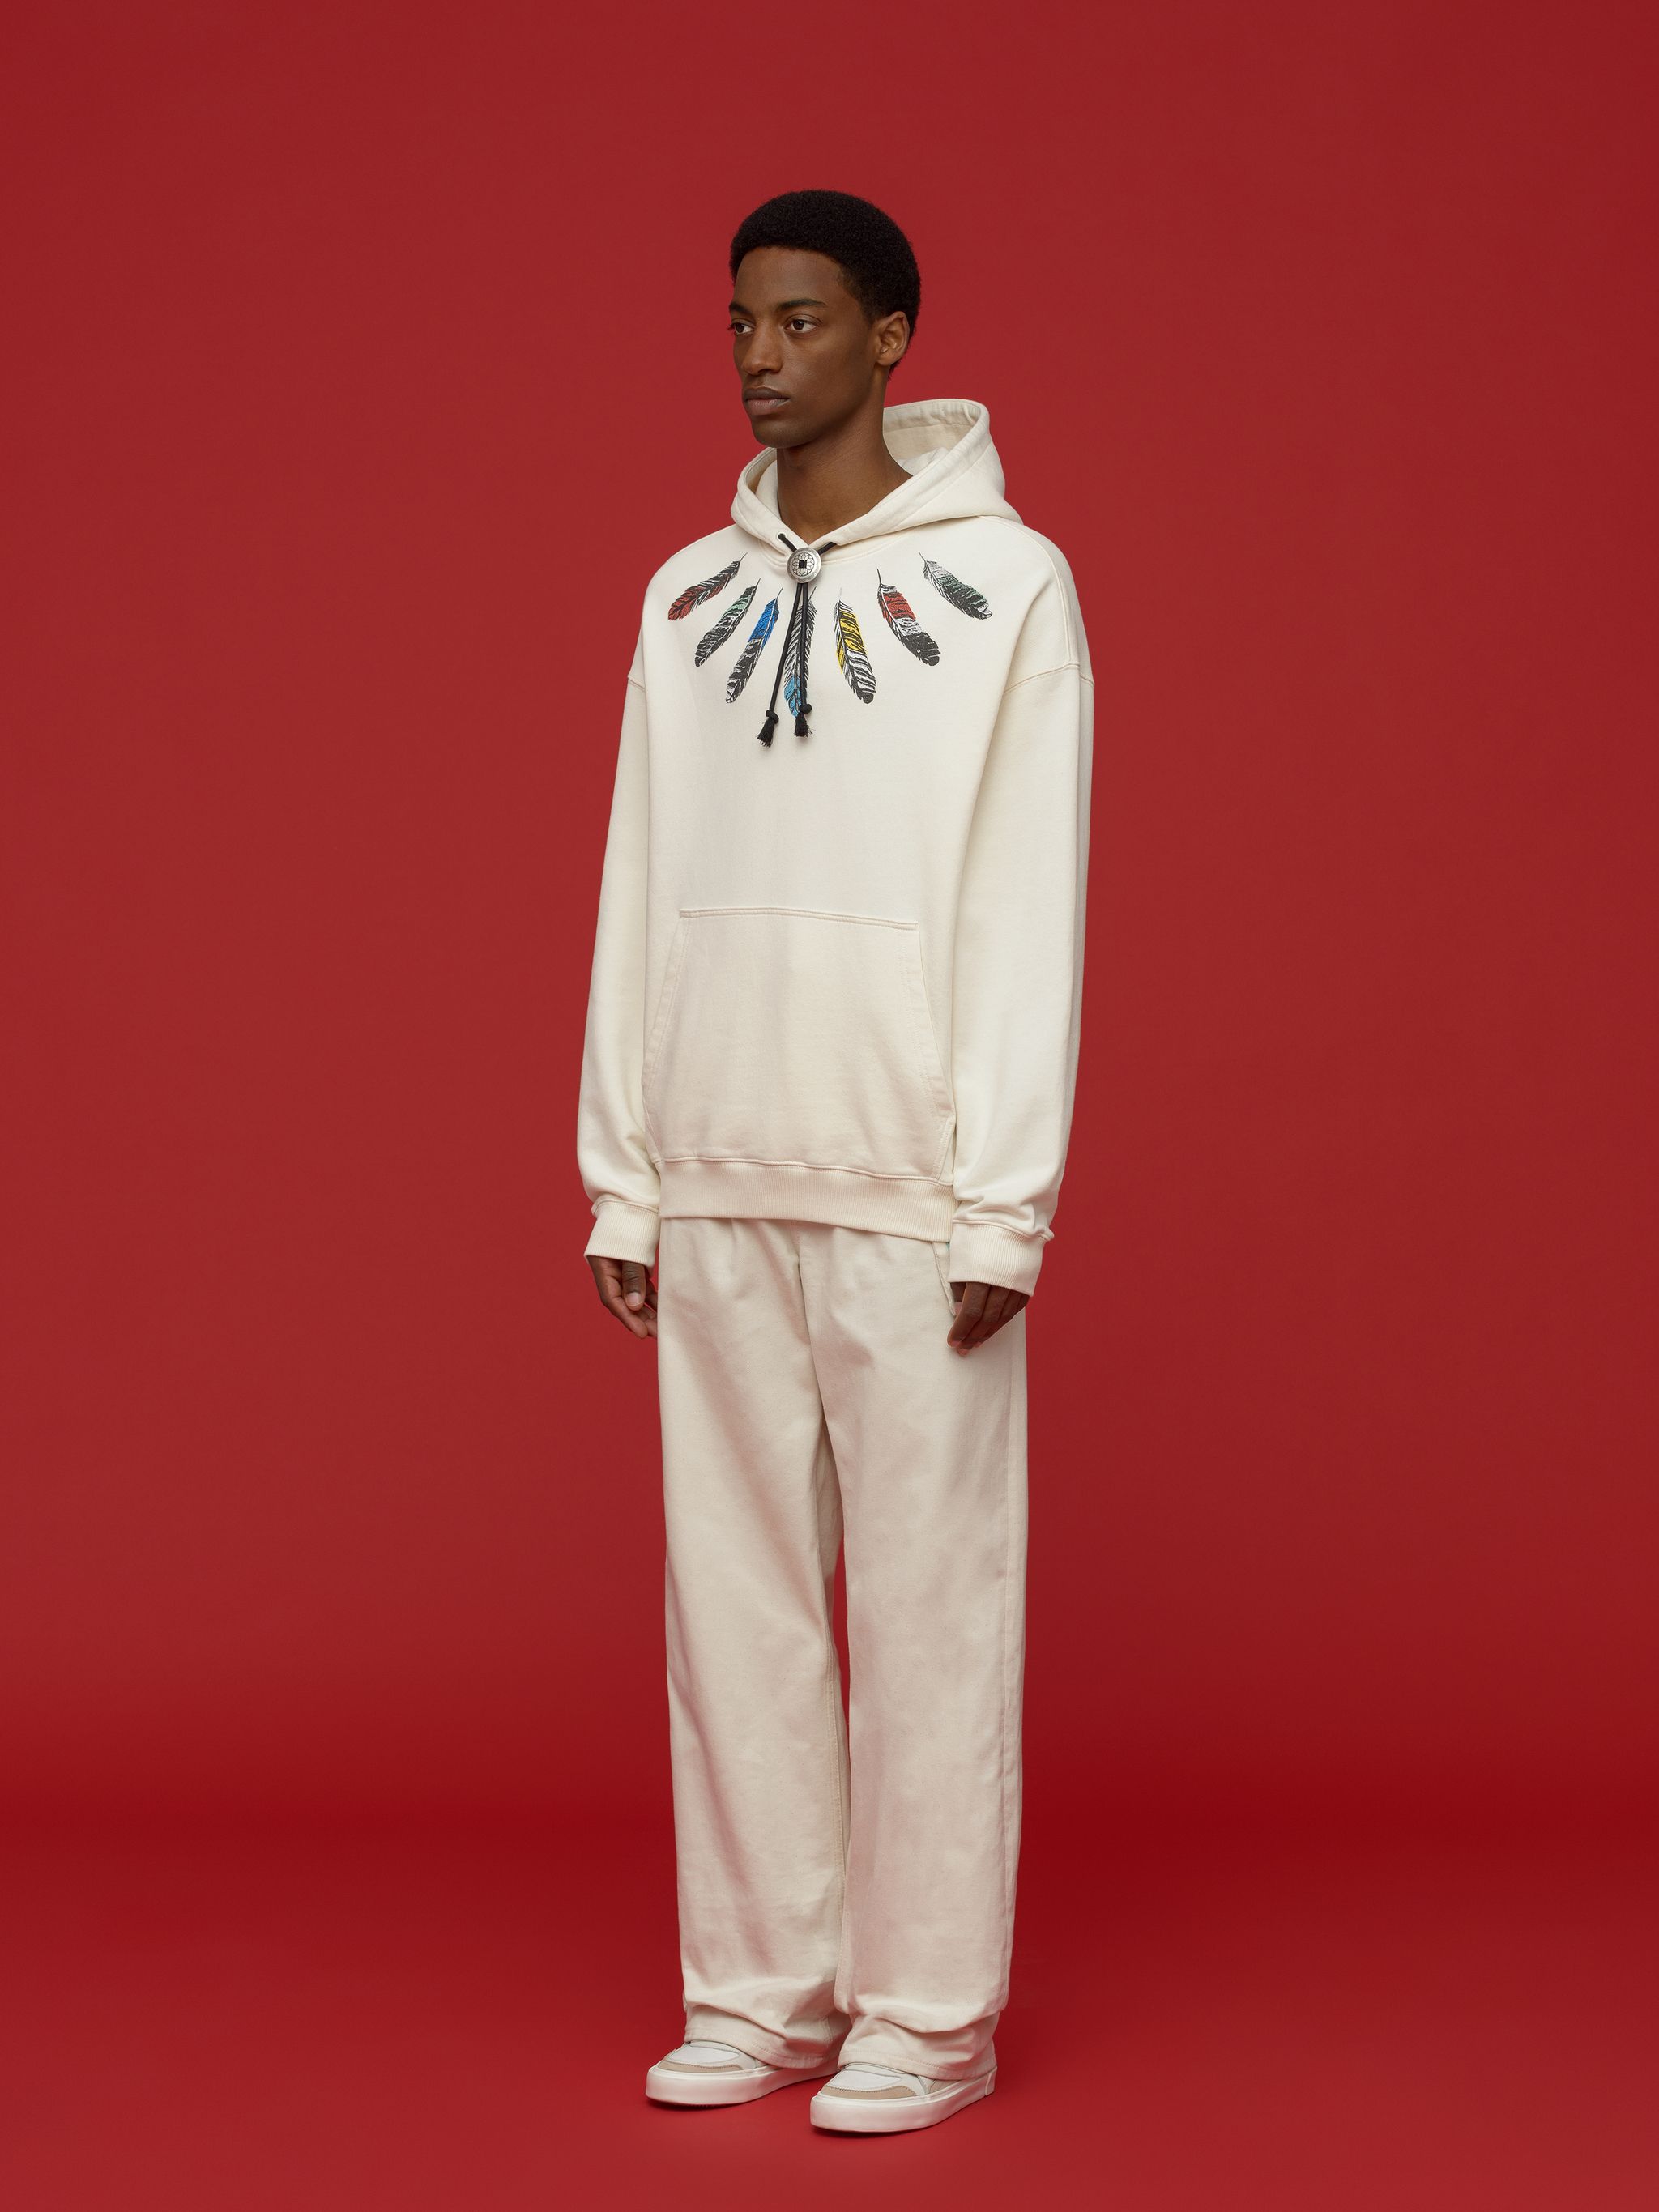 feather-print pullover hoodie from Marcelo Burlon County of Milan featuring white/multicolour, cotton, feather print, drawstring hood, long sleeves, front pouch pocket and straight hem.